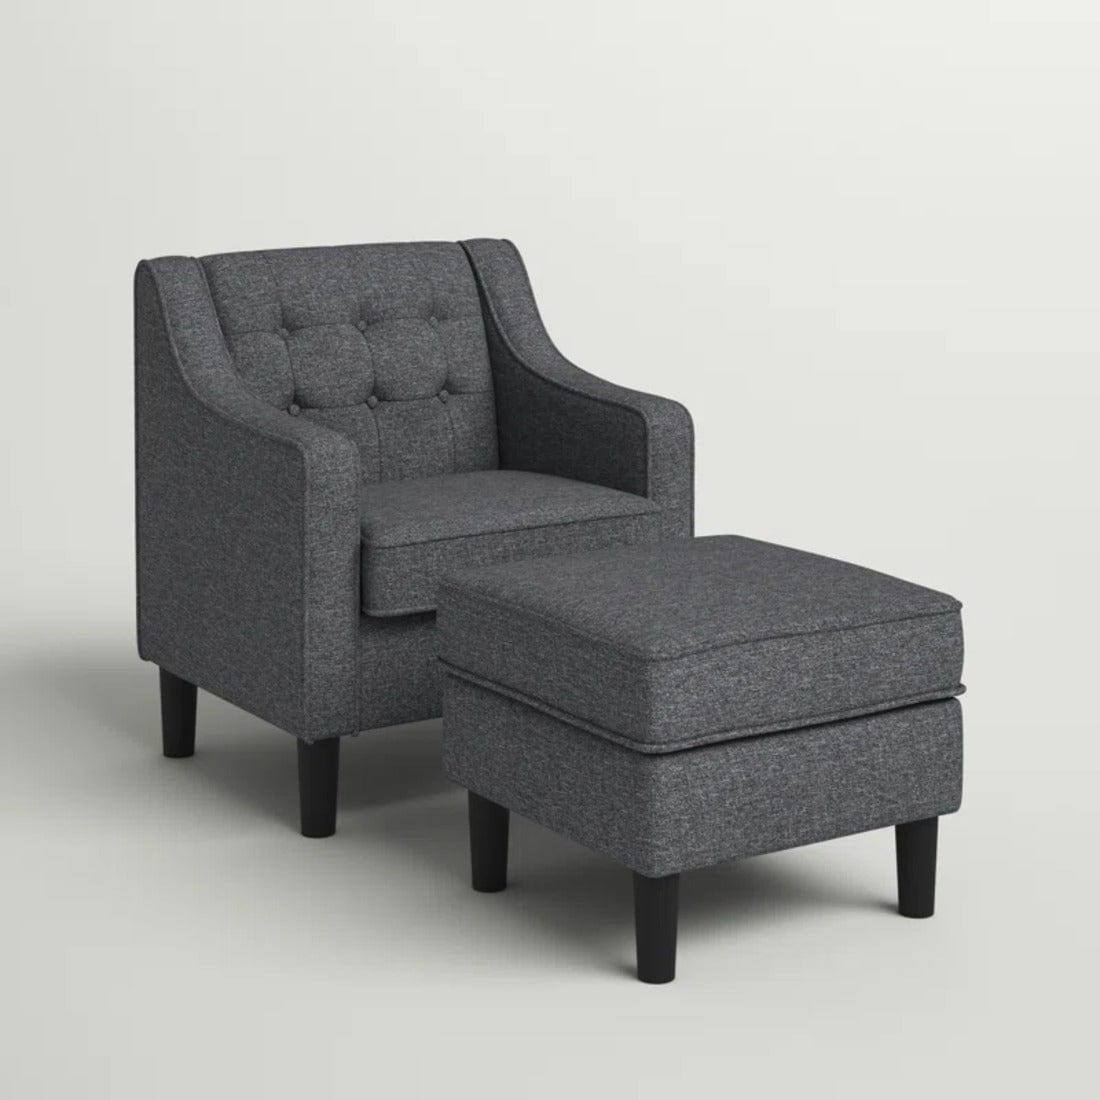 Pearson accent chair with ottoman